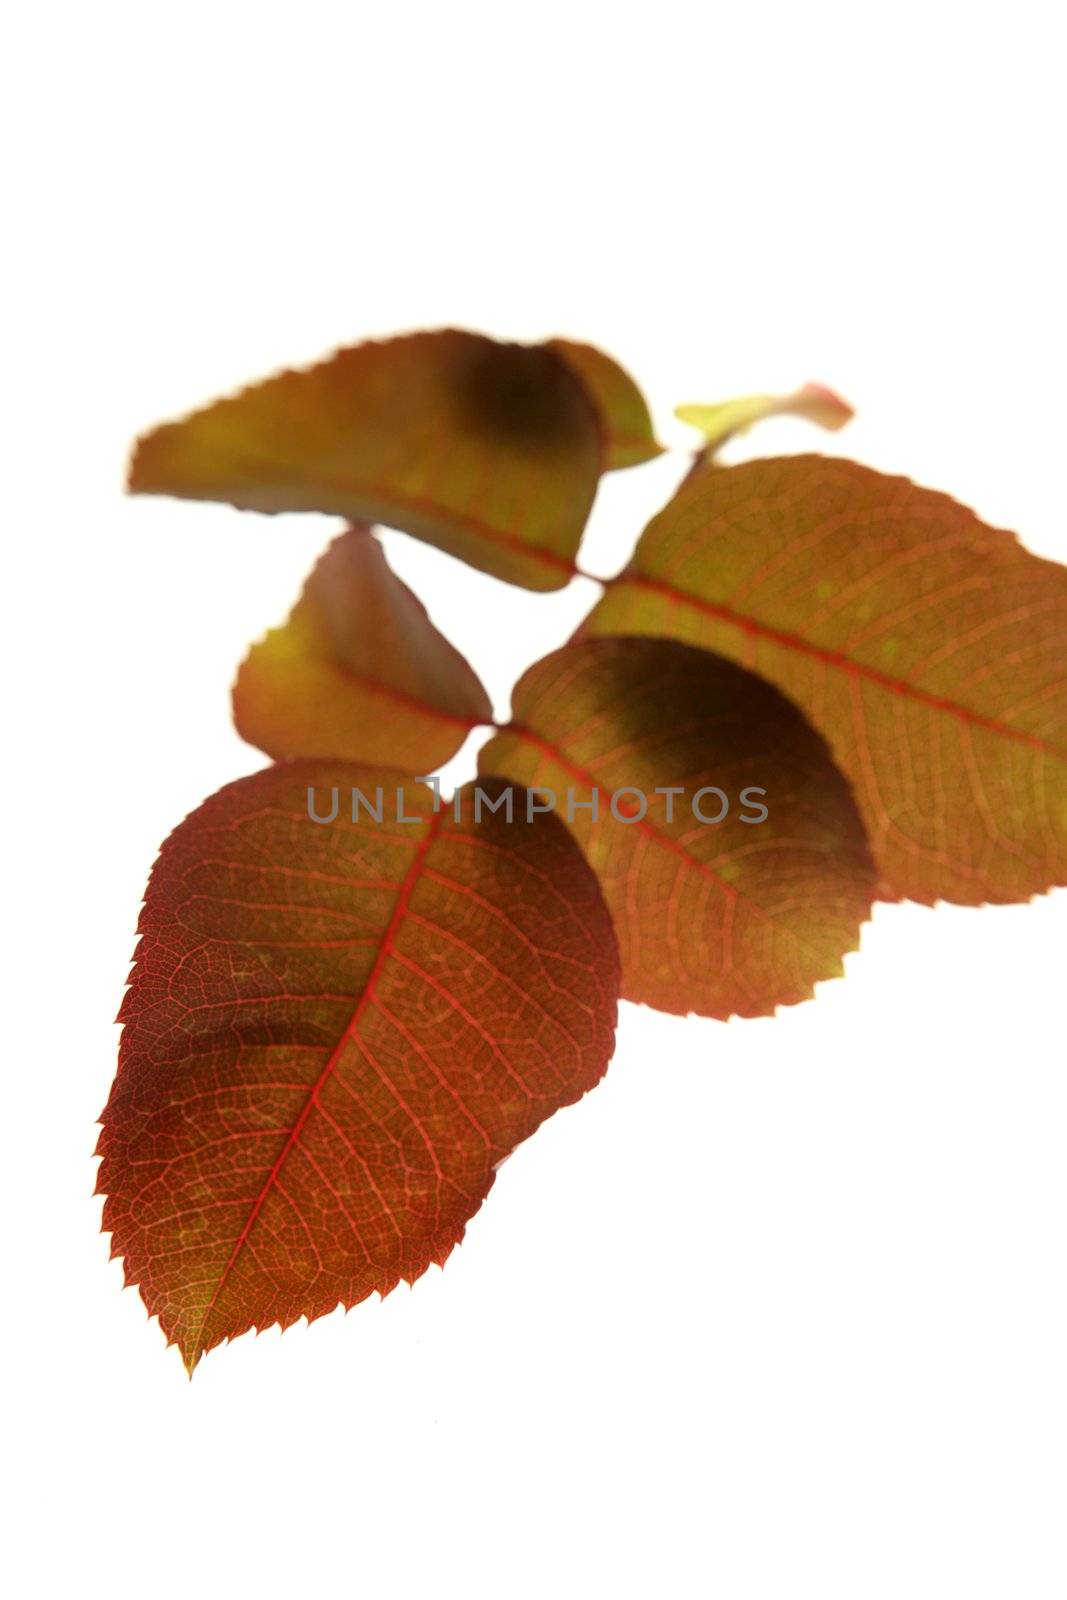 Autumn, fall leaves decorative still at studio white background, using the transparency